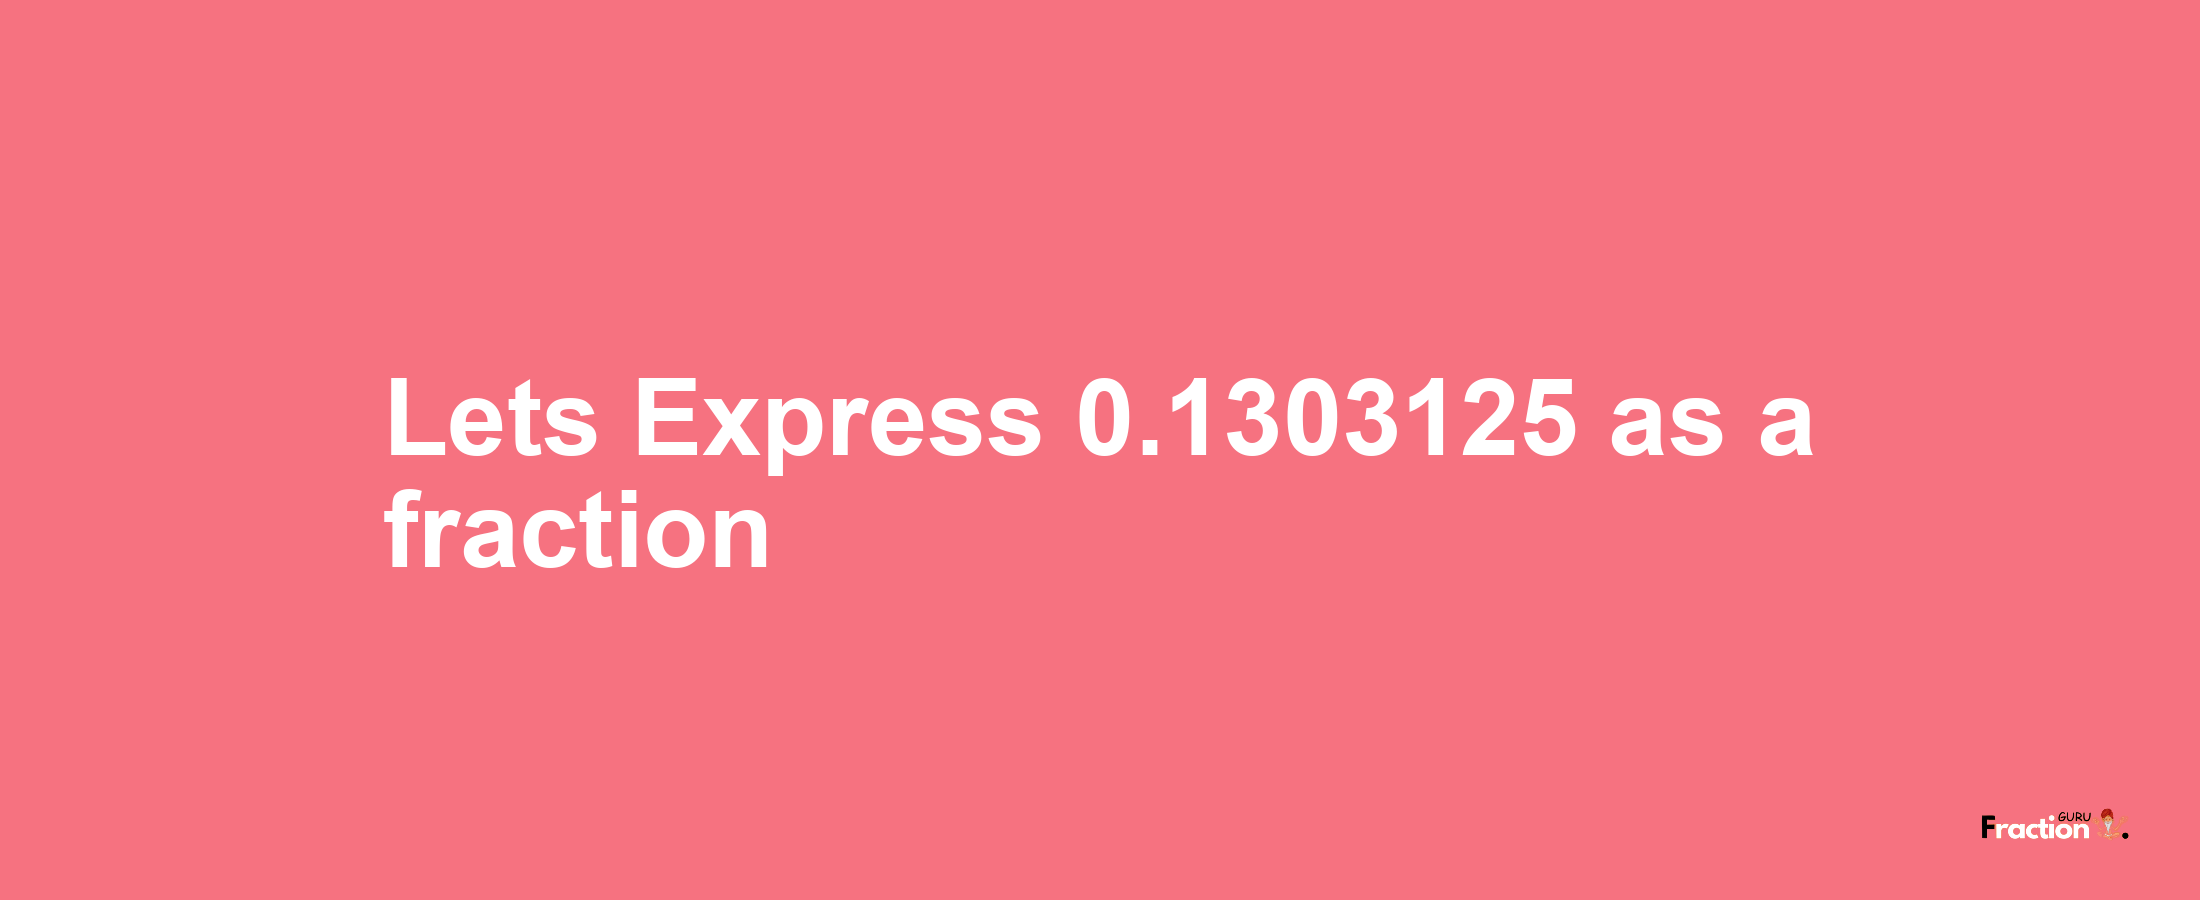 Lets Express 0.1303125 as afraction